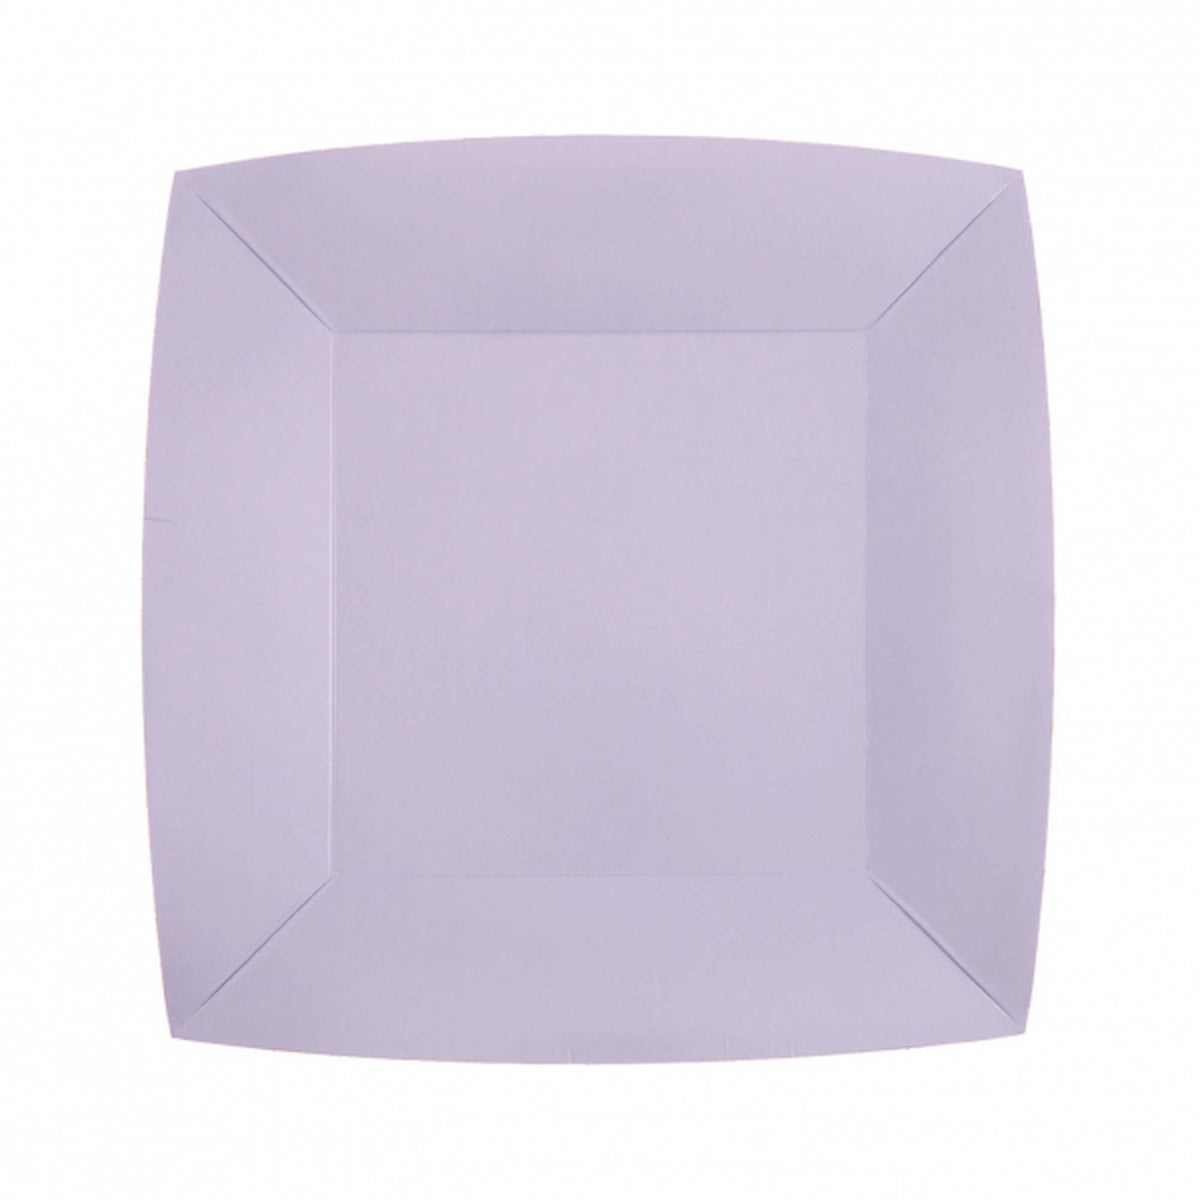 SANTEX Everyday Entertaining Violet Small Square Dessert Party Paper Plates, 7 Inches, 10 Count 3660380072041